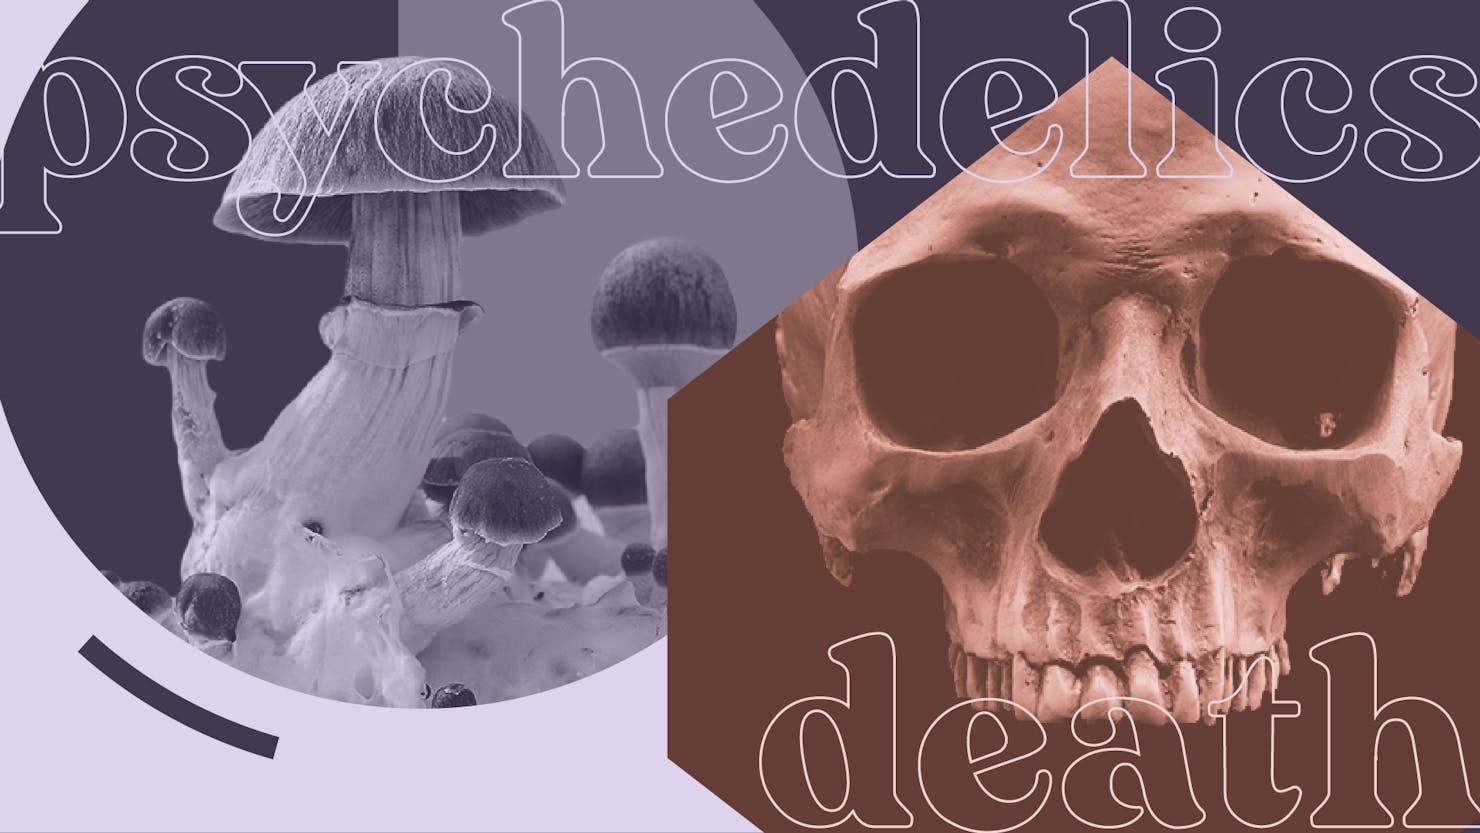 Psychedelics-and-death-featured-image.jpg